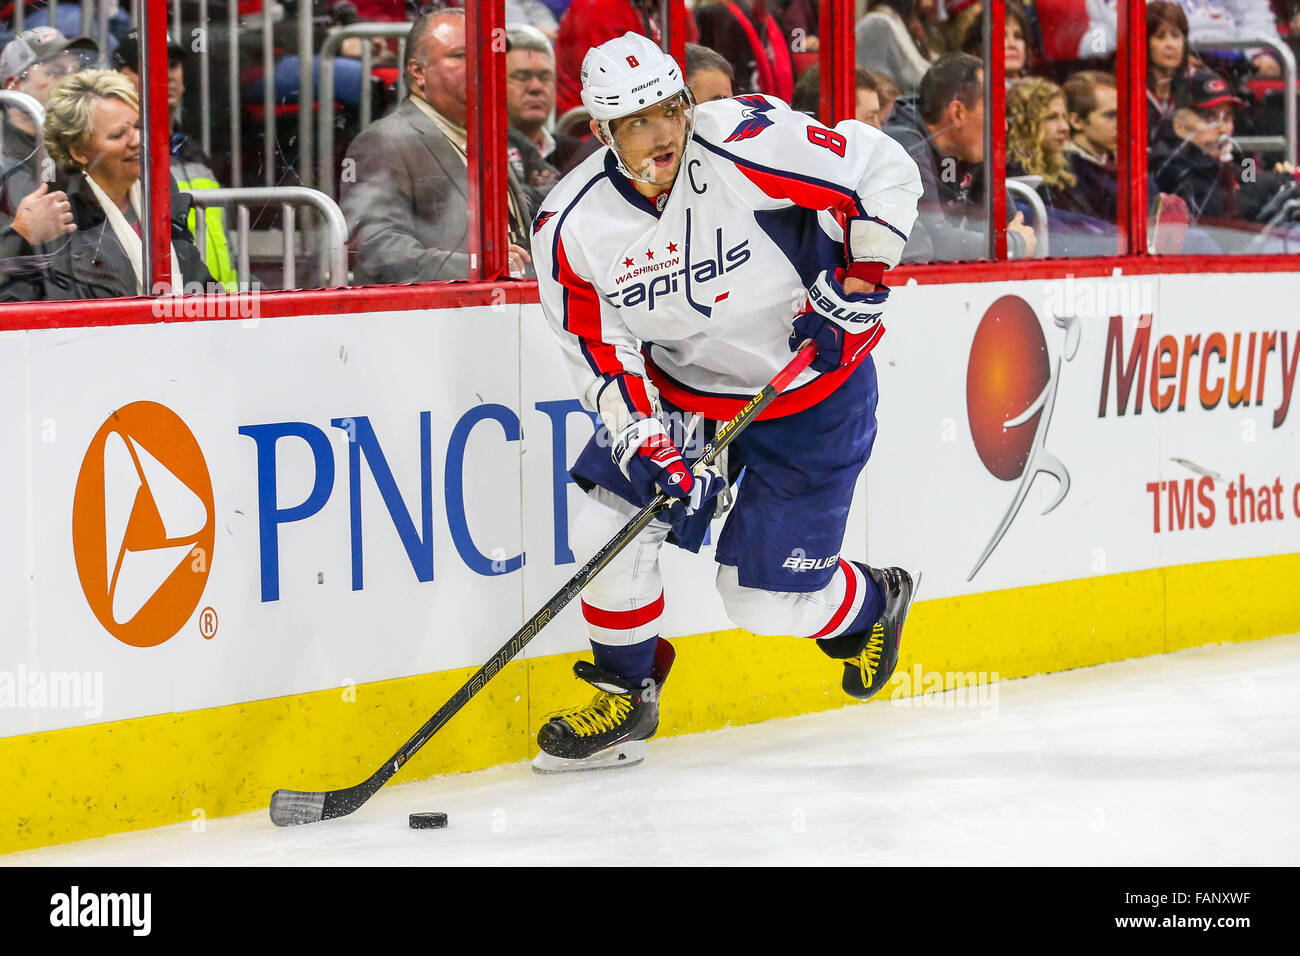 Dec. 31, 2015 - Washington Capitals left wing Alex Ovechkin (8) during the NHL game between the Washington Capitals and the Carolina Hurricanes at the PNC Arena. © Andy Martin Jr./ZUMA Wire/Alamy Live News Stock Photo